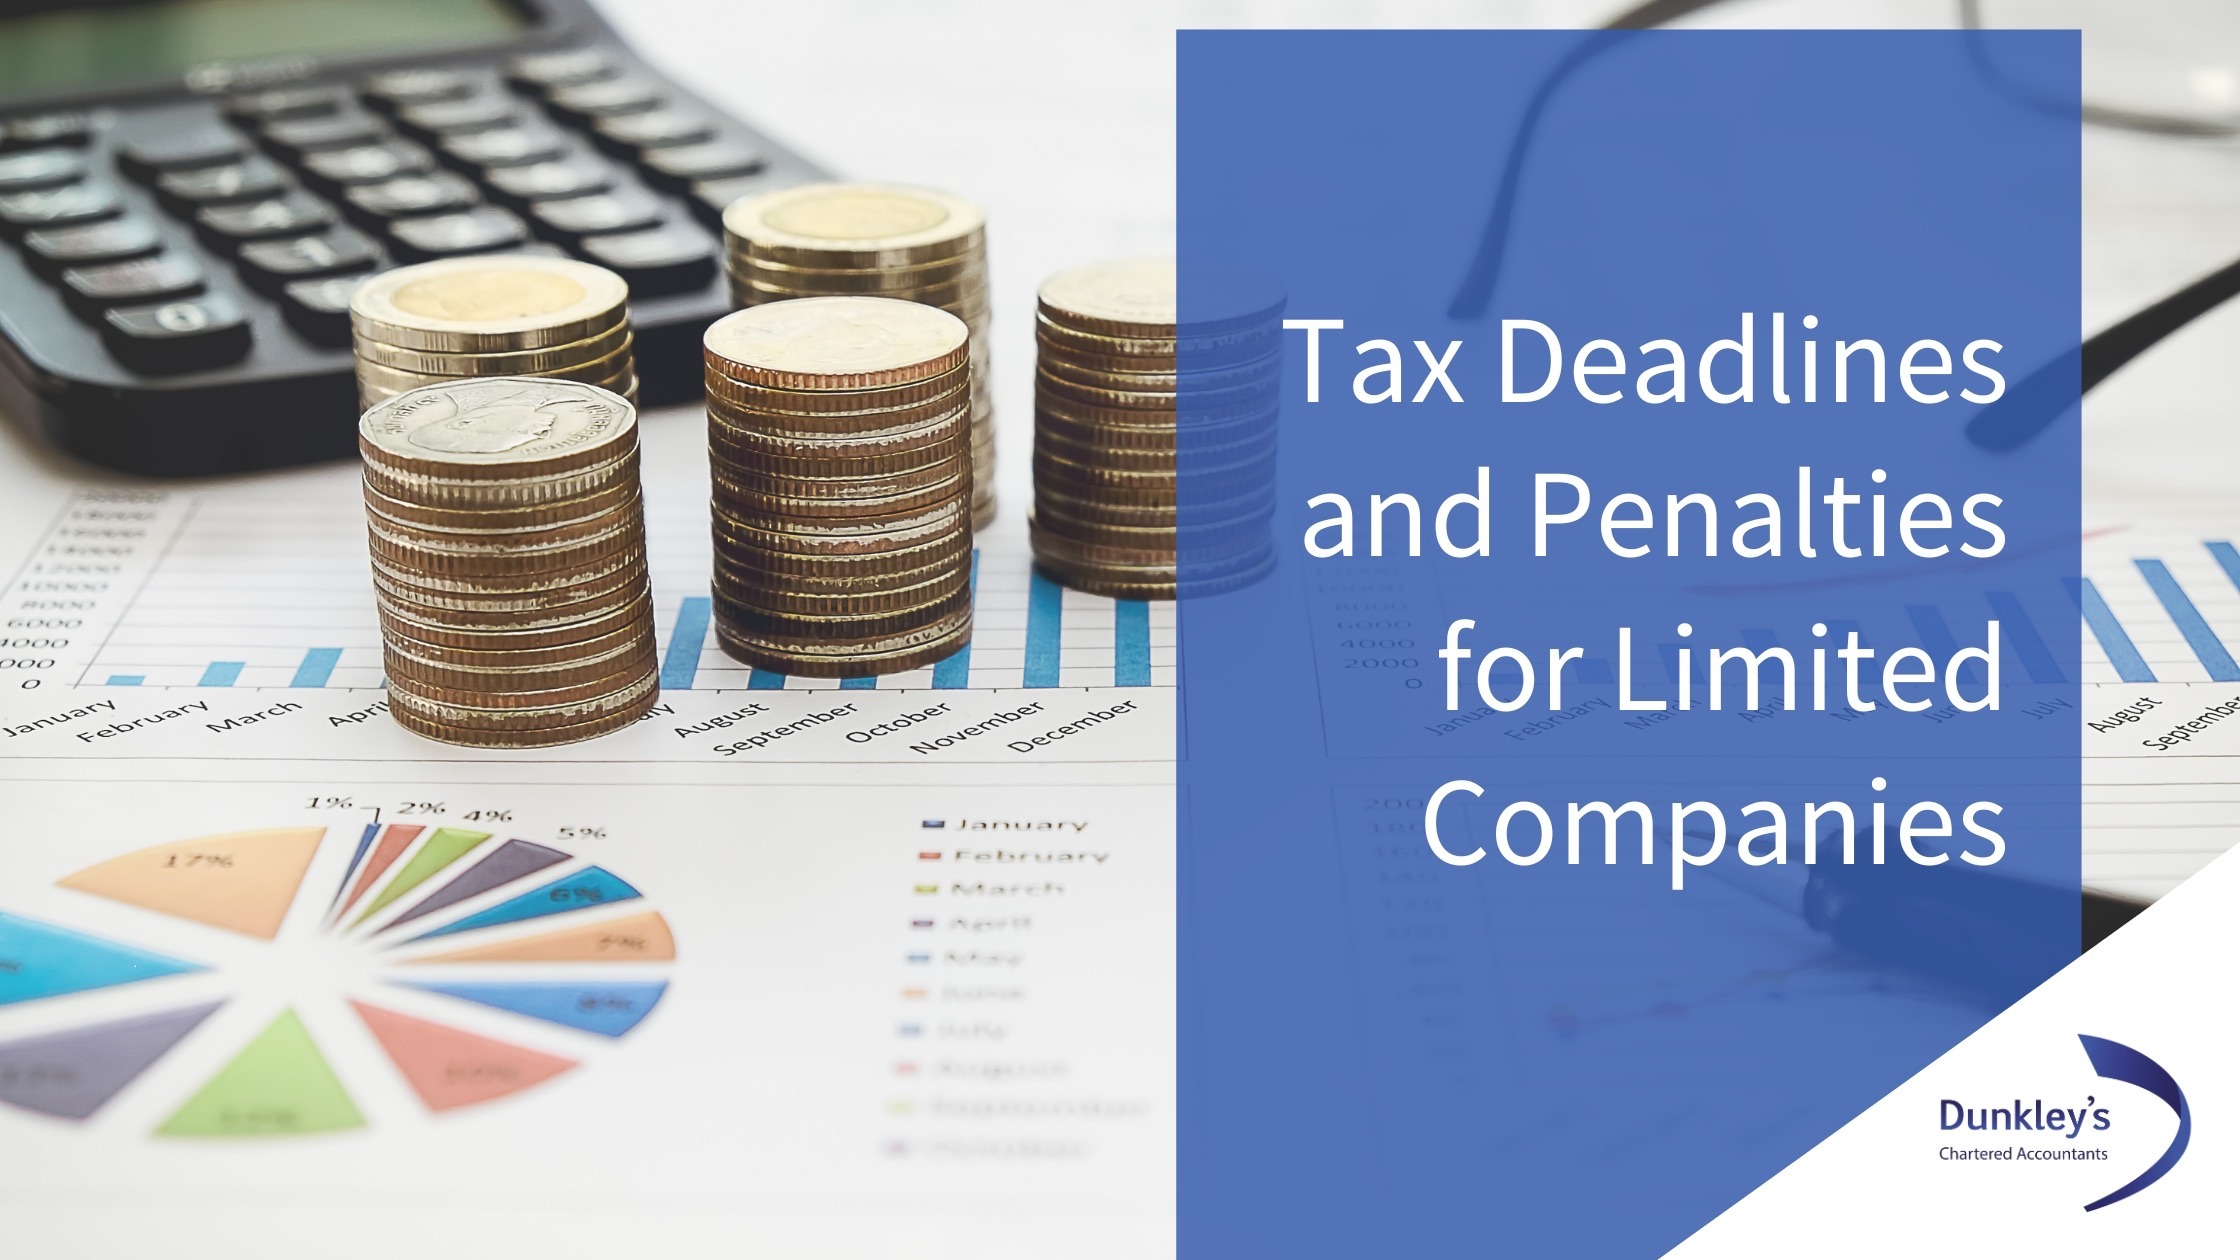 Tax planning and penalties